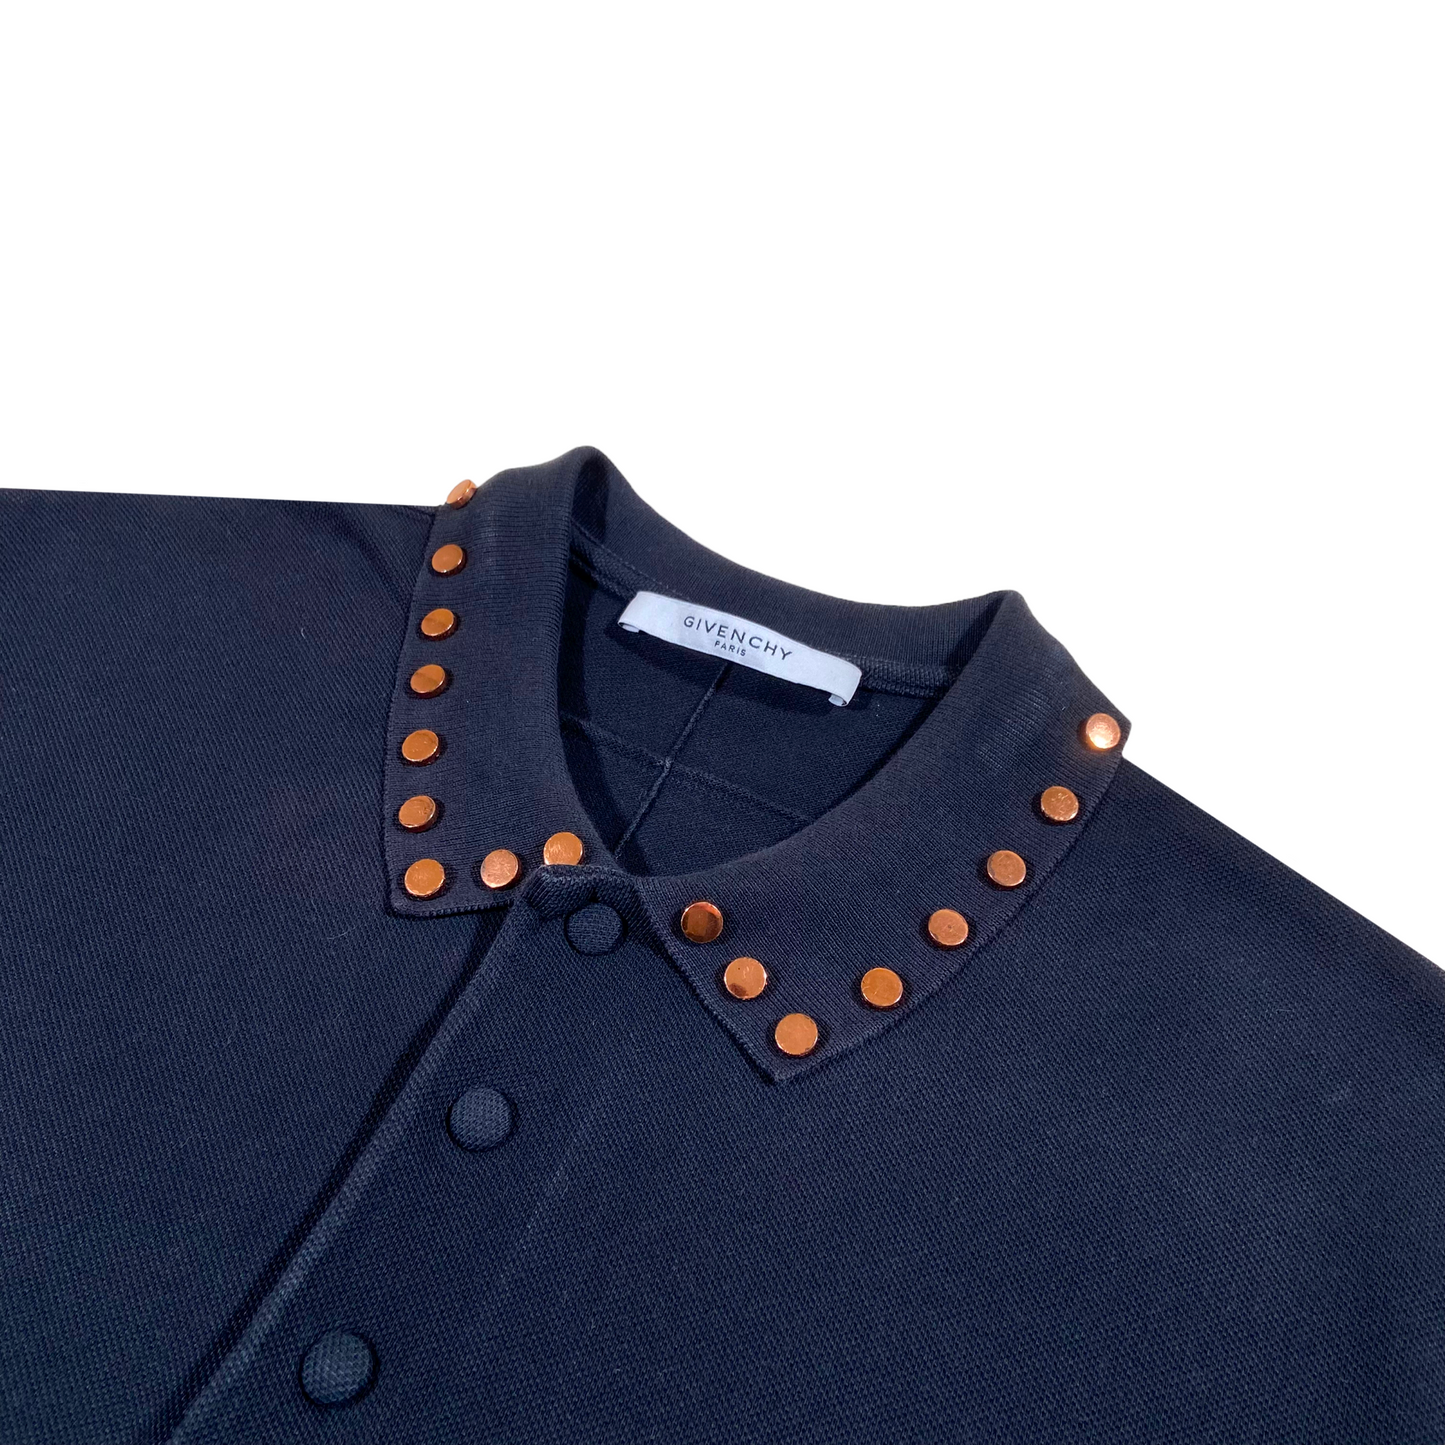 GIVENCHY STUDDED POLO TOP BLACK S